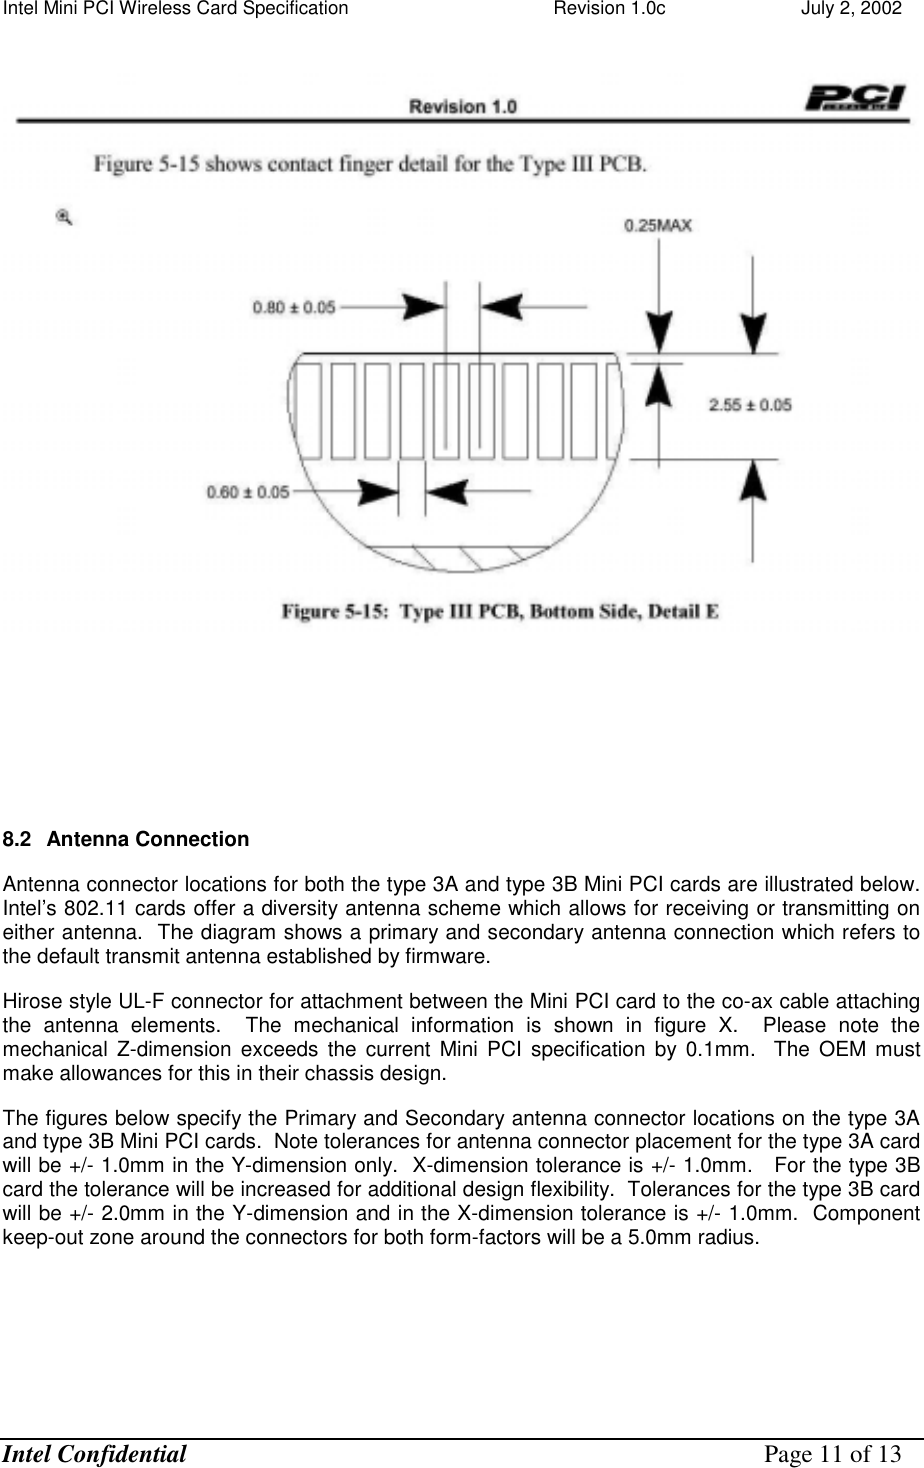 Intel Mini PCI Wireless Card Specification    Revision 1.0c                          July 2, 2002  Intel Confidential    Page 11 of 13          8.2  Antenna Connection  Antenna connector locations for both the type 3A and type 3B Mini PCI cards are illustrated below.  Intel’s 802.11 cards offer a diversity antenna scheme which allows for receiving or transmitting on either antenna.  The diagram shows a primary and secondary antenna connection which refers to the default transmit antenna established by firmware.   Hirose style UL-F connector for attachment between the Mini PCI card to the co-ax cable attaching the antenna elements.  The mechanical information is shown in figure X.  Please note the mechanical Z-dimension exceeds the current Mini PCI specification by 0.1mm.  The OEM must make allowances for this in their chassis design. The figures below specify the Primary and Secondary antenna connector locations on the type 3A and type 3B Mini PCI cards.  Note tolerances for antenna connector placement for the type 3A card will be +/- 1.0mm in the Y-dimension only.  X-dimension tolerance is +/- 1.0mm.   For the type 3B card the tolerance will be increased for additional design flexibility.  Tolerances for the type 3B card will be +/- 2.0mm in the Y-dimension and in the X-dimension tolerance is +/- 1.0mm.  Component keep-out zone around the connectors for both form-factors will be a 5.0mm radius. 